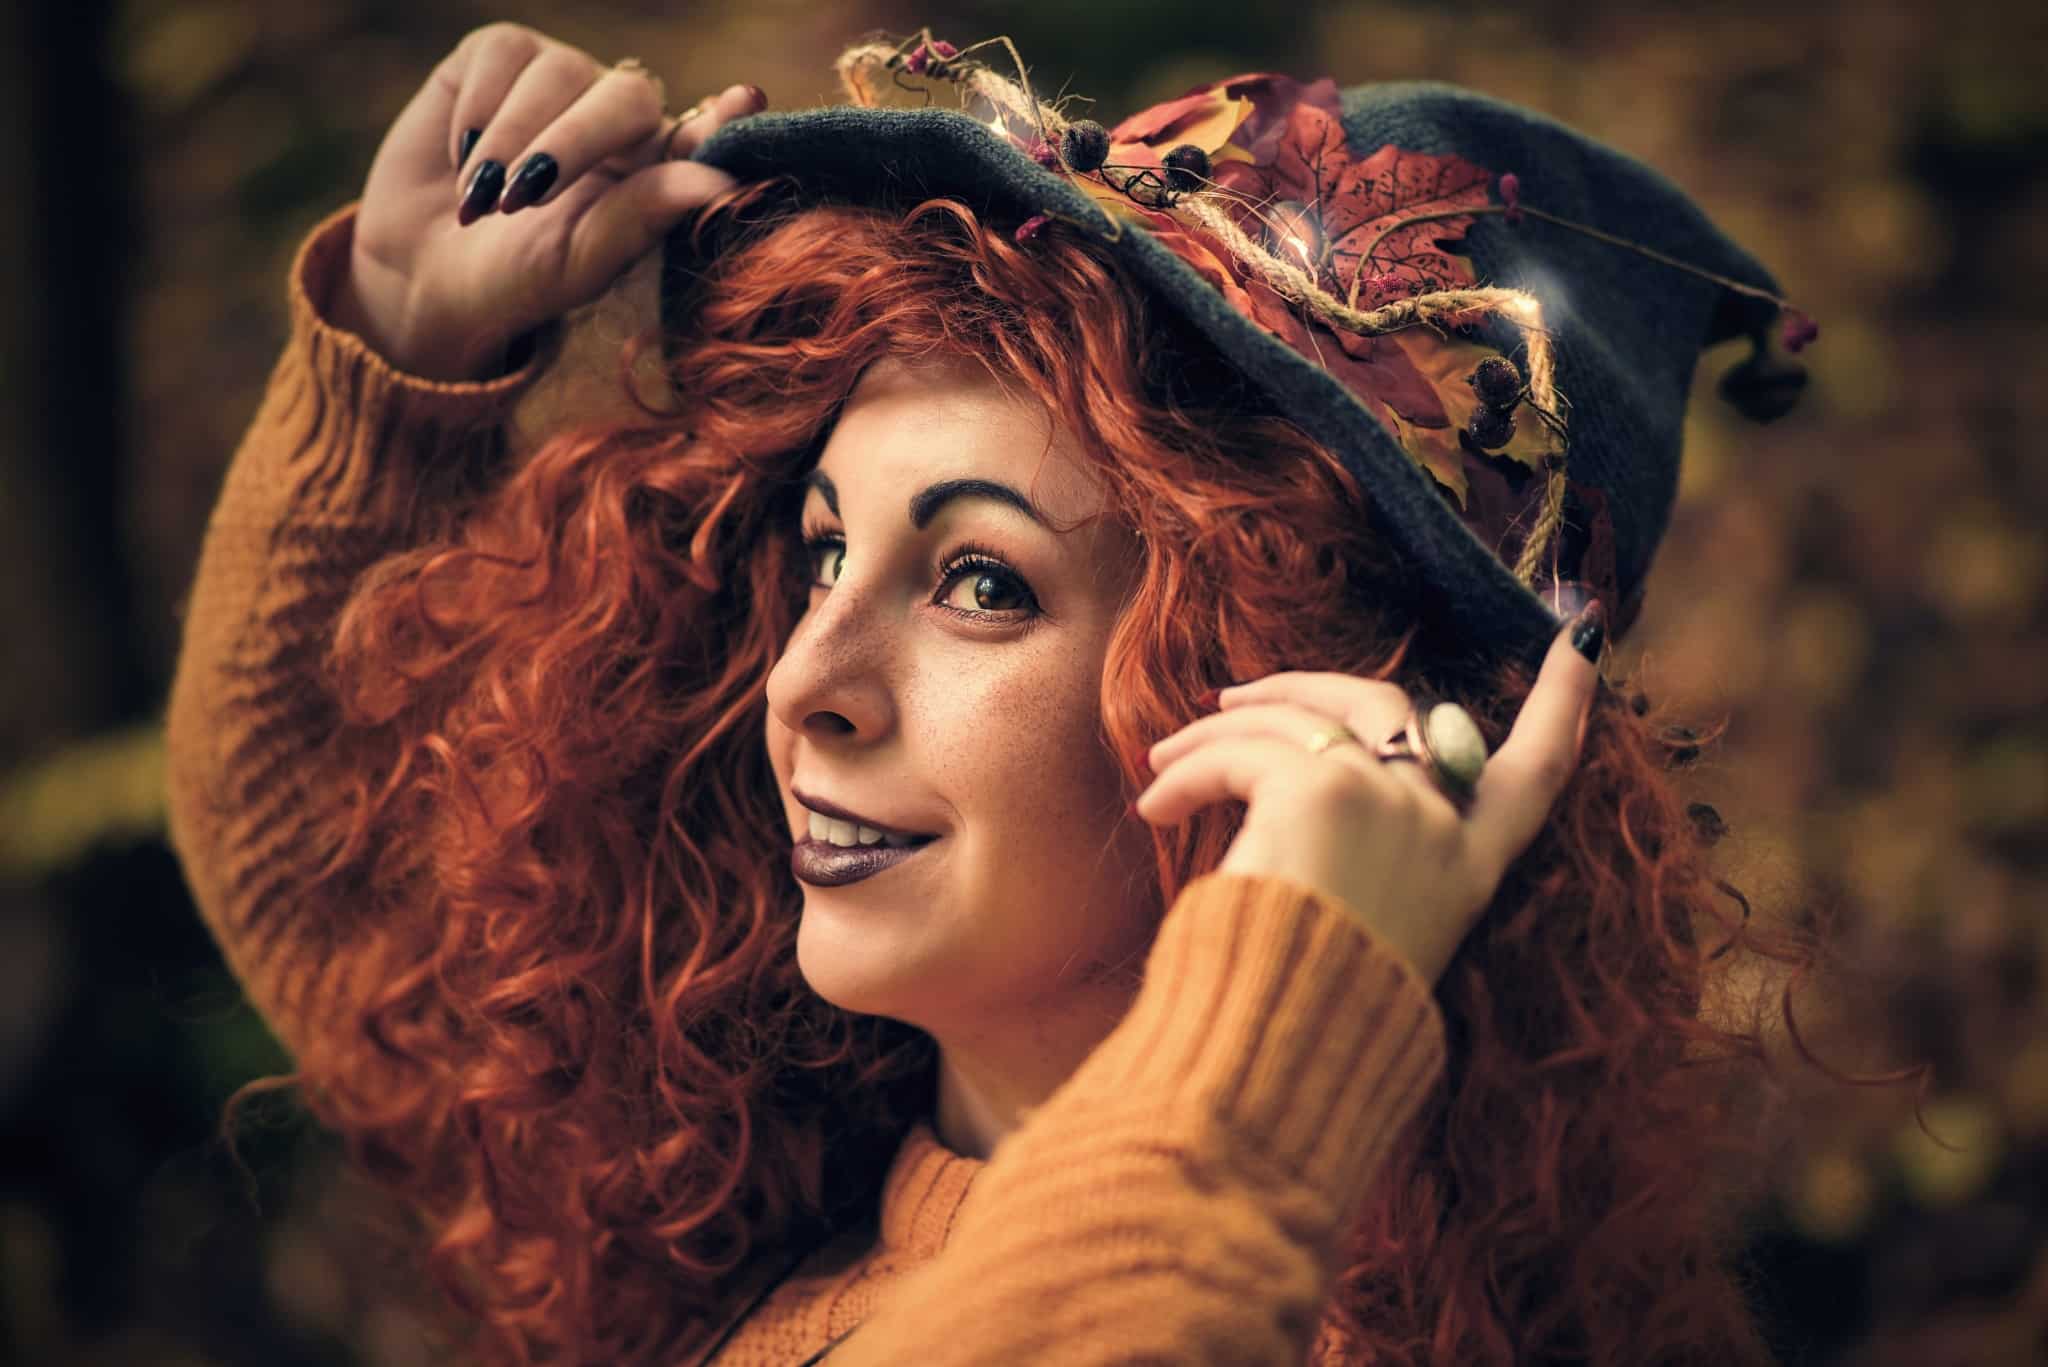 Get inspired! Halloween portrait and edits